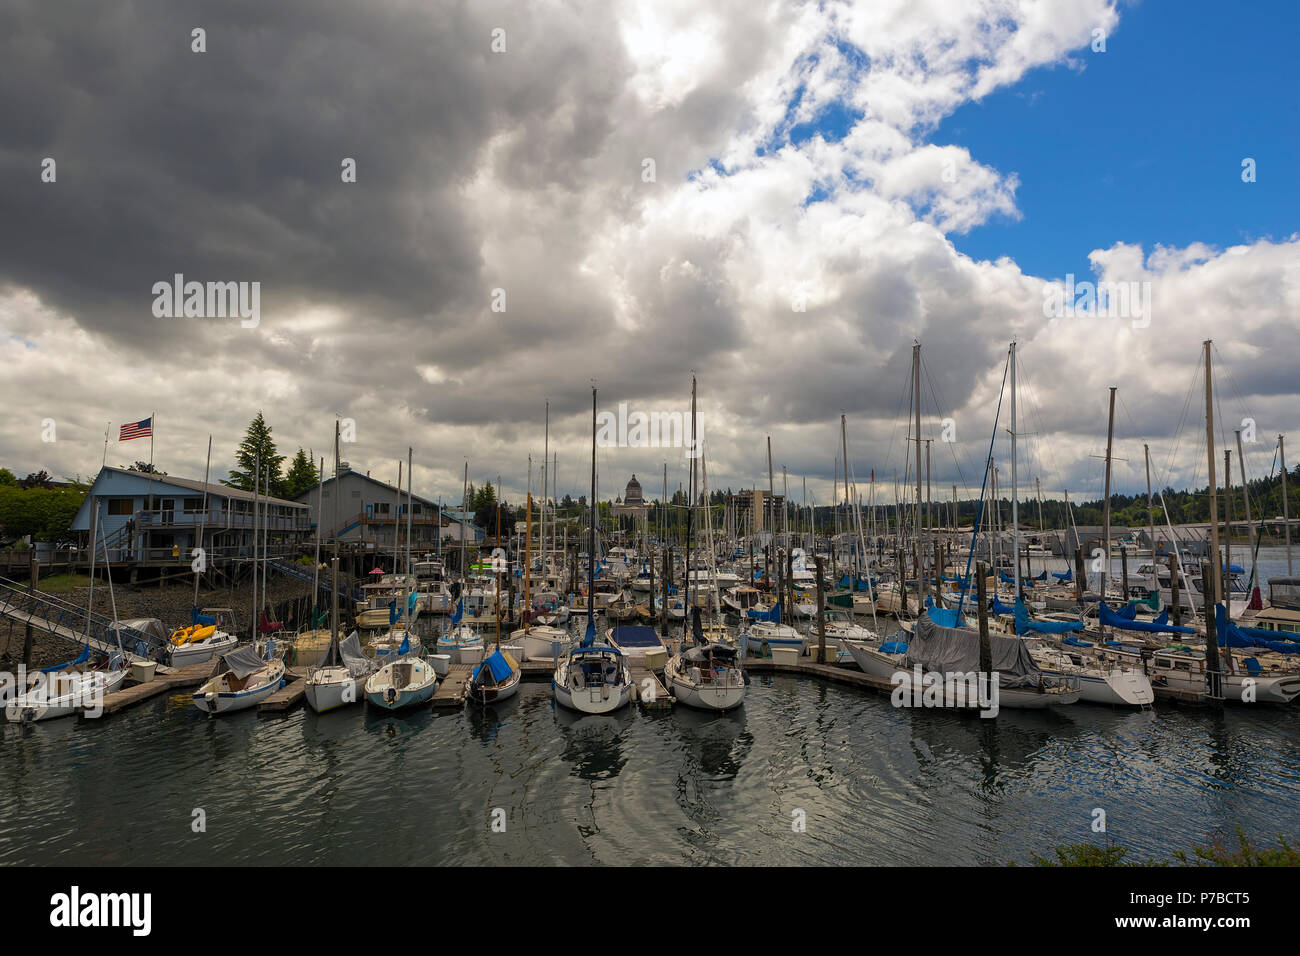 Marina in Olympia Washington State by Capitol building on a cloudy day Stock Photo